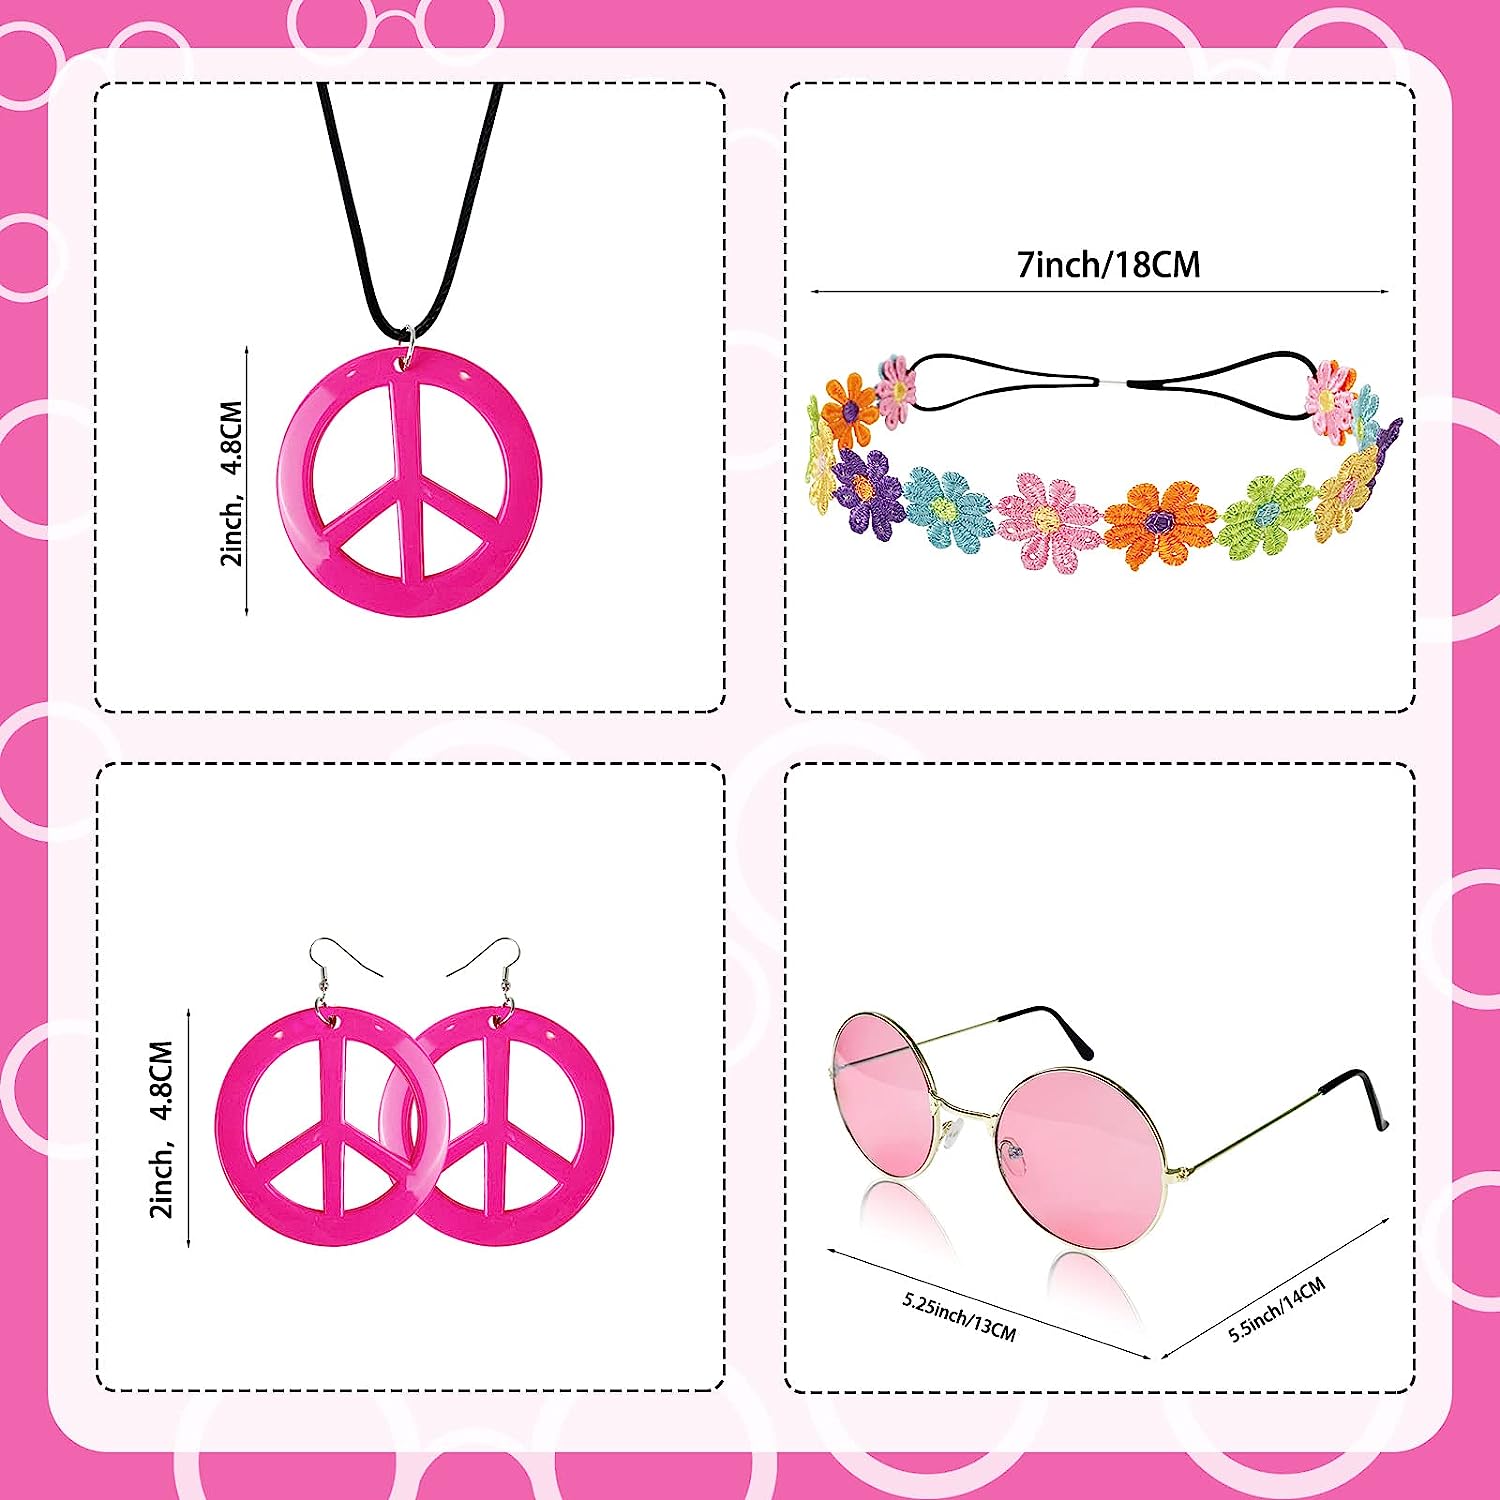 Set, Hippie Costume Set Includes Peace Sign Necklace And Earrings, Flower  Crown Headband And Hippie Sunglasses Y2k 70s Accessories, Stage Performance